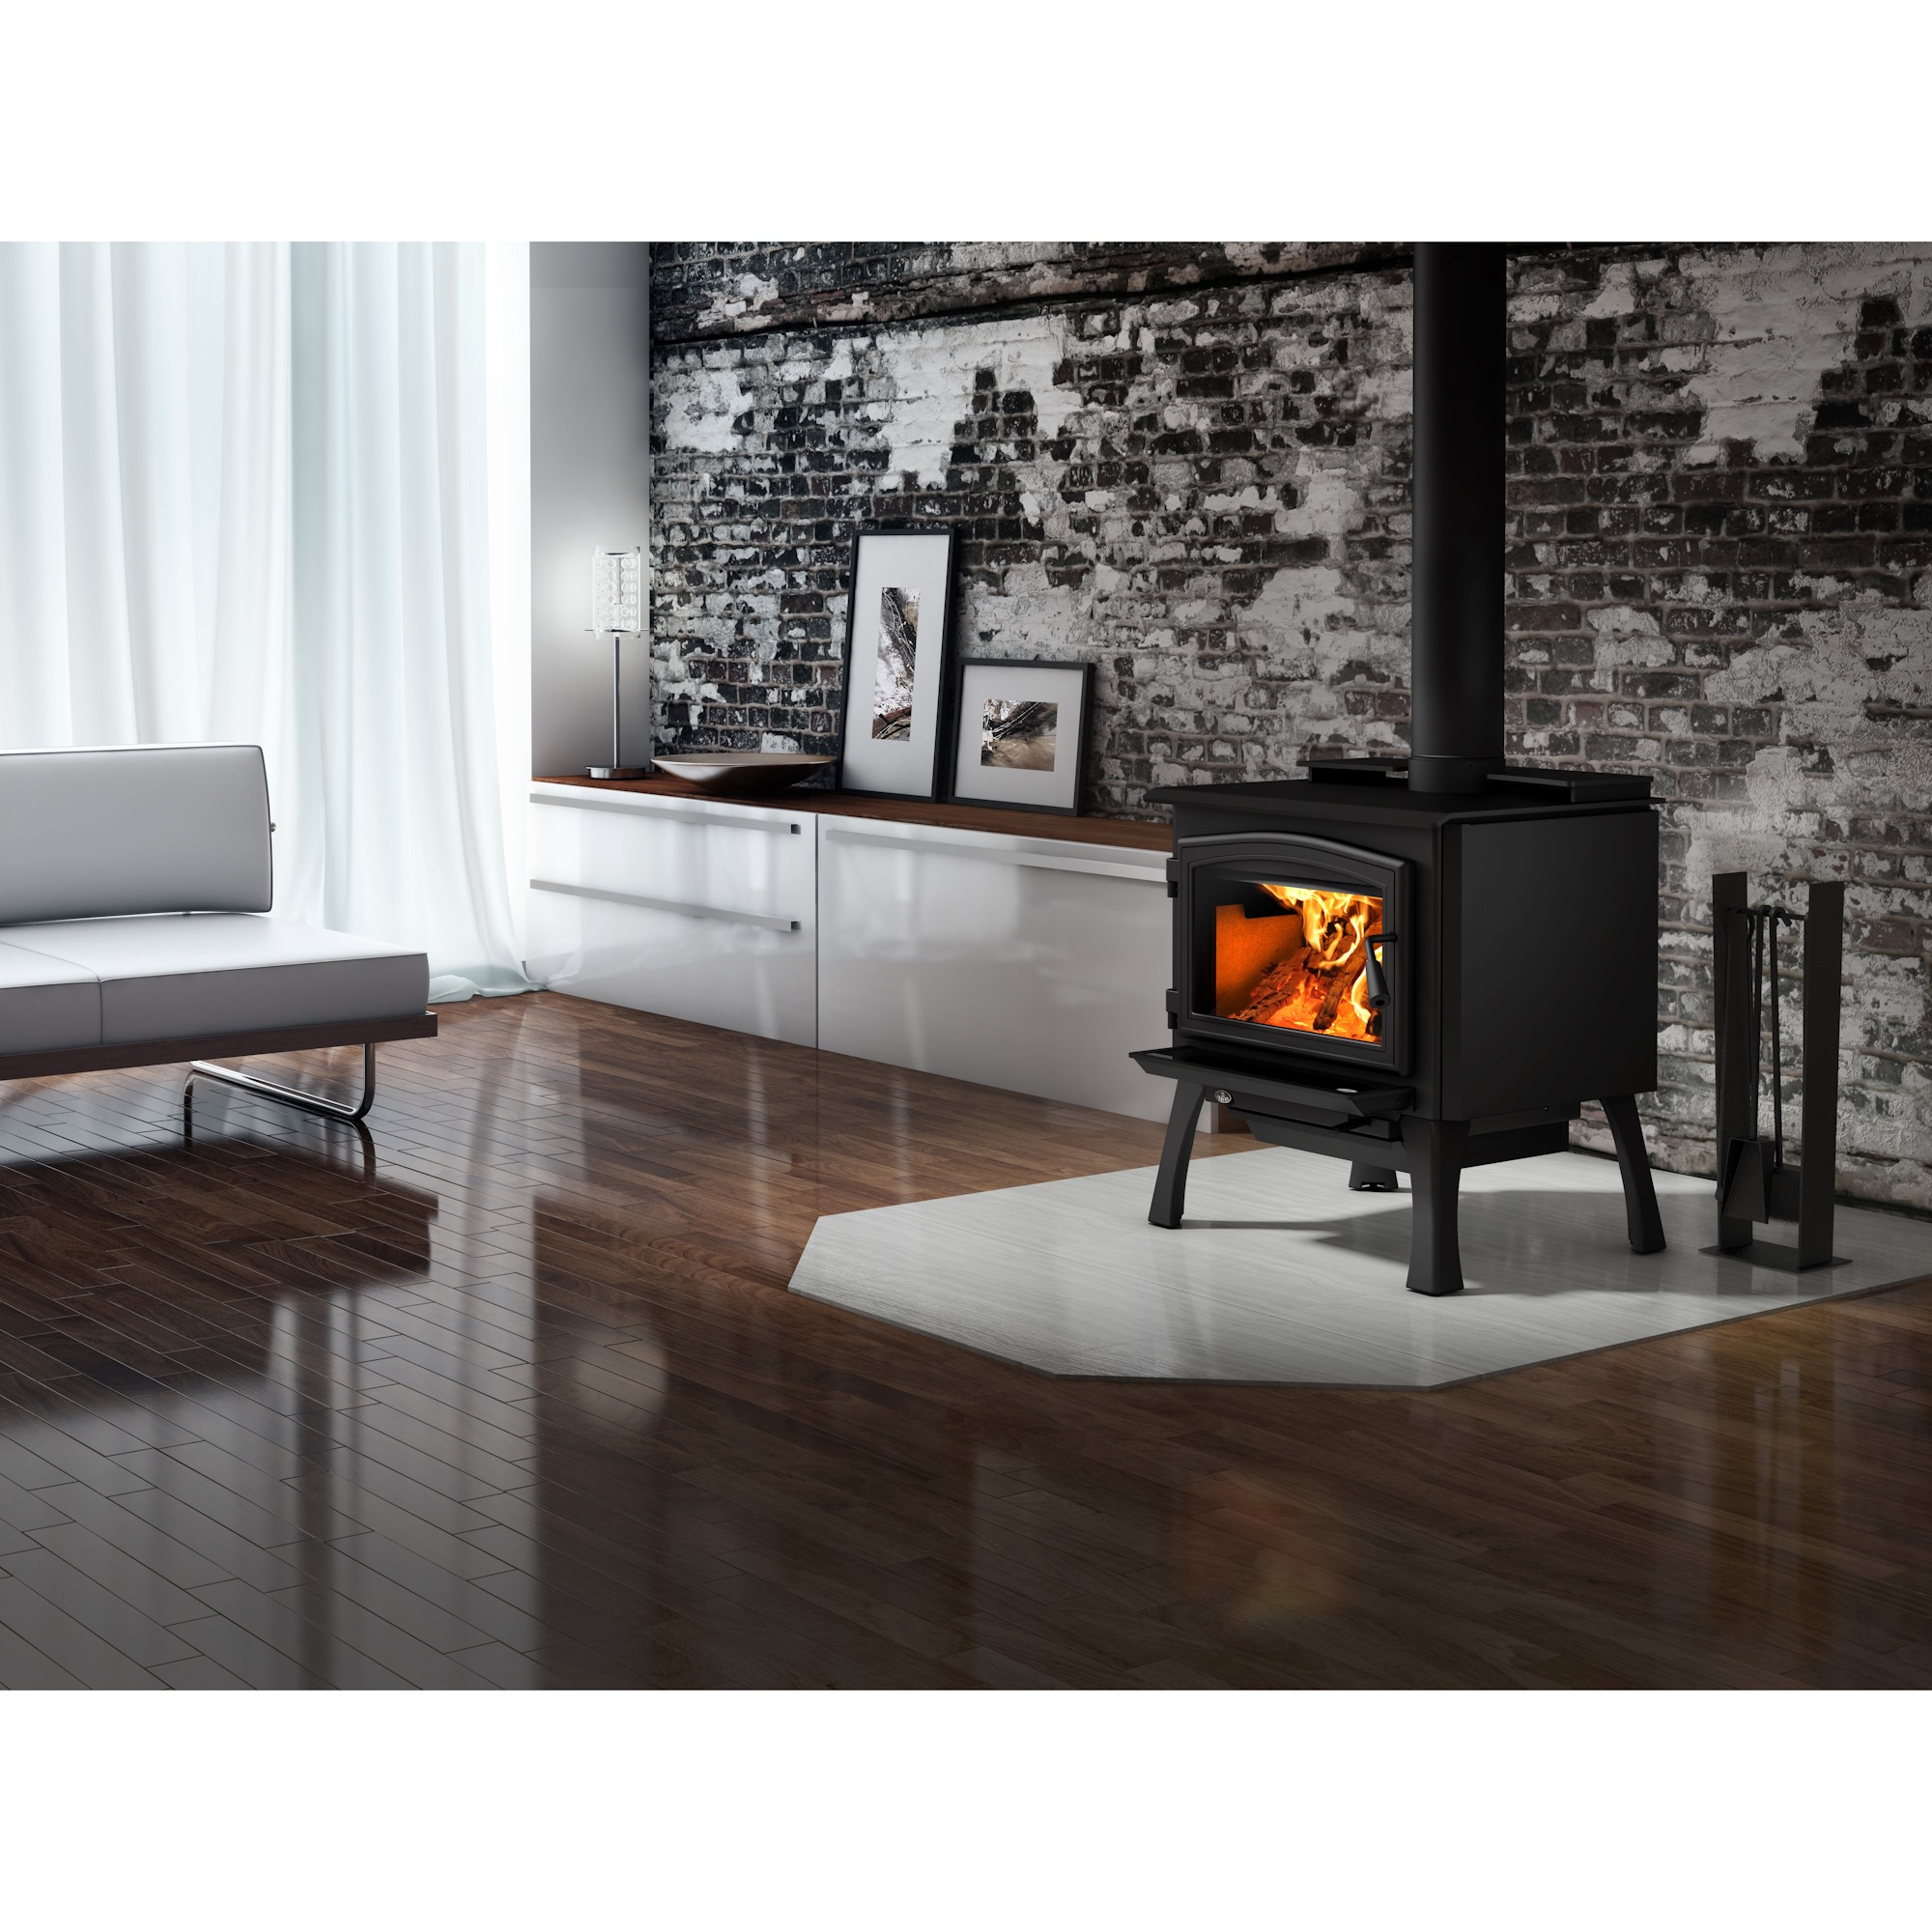 Image Osburn 2000 wood stove with blower                                                                                                                    